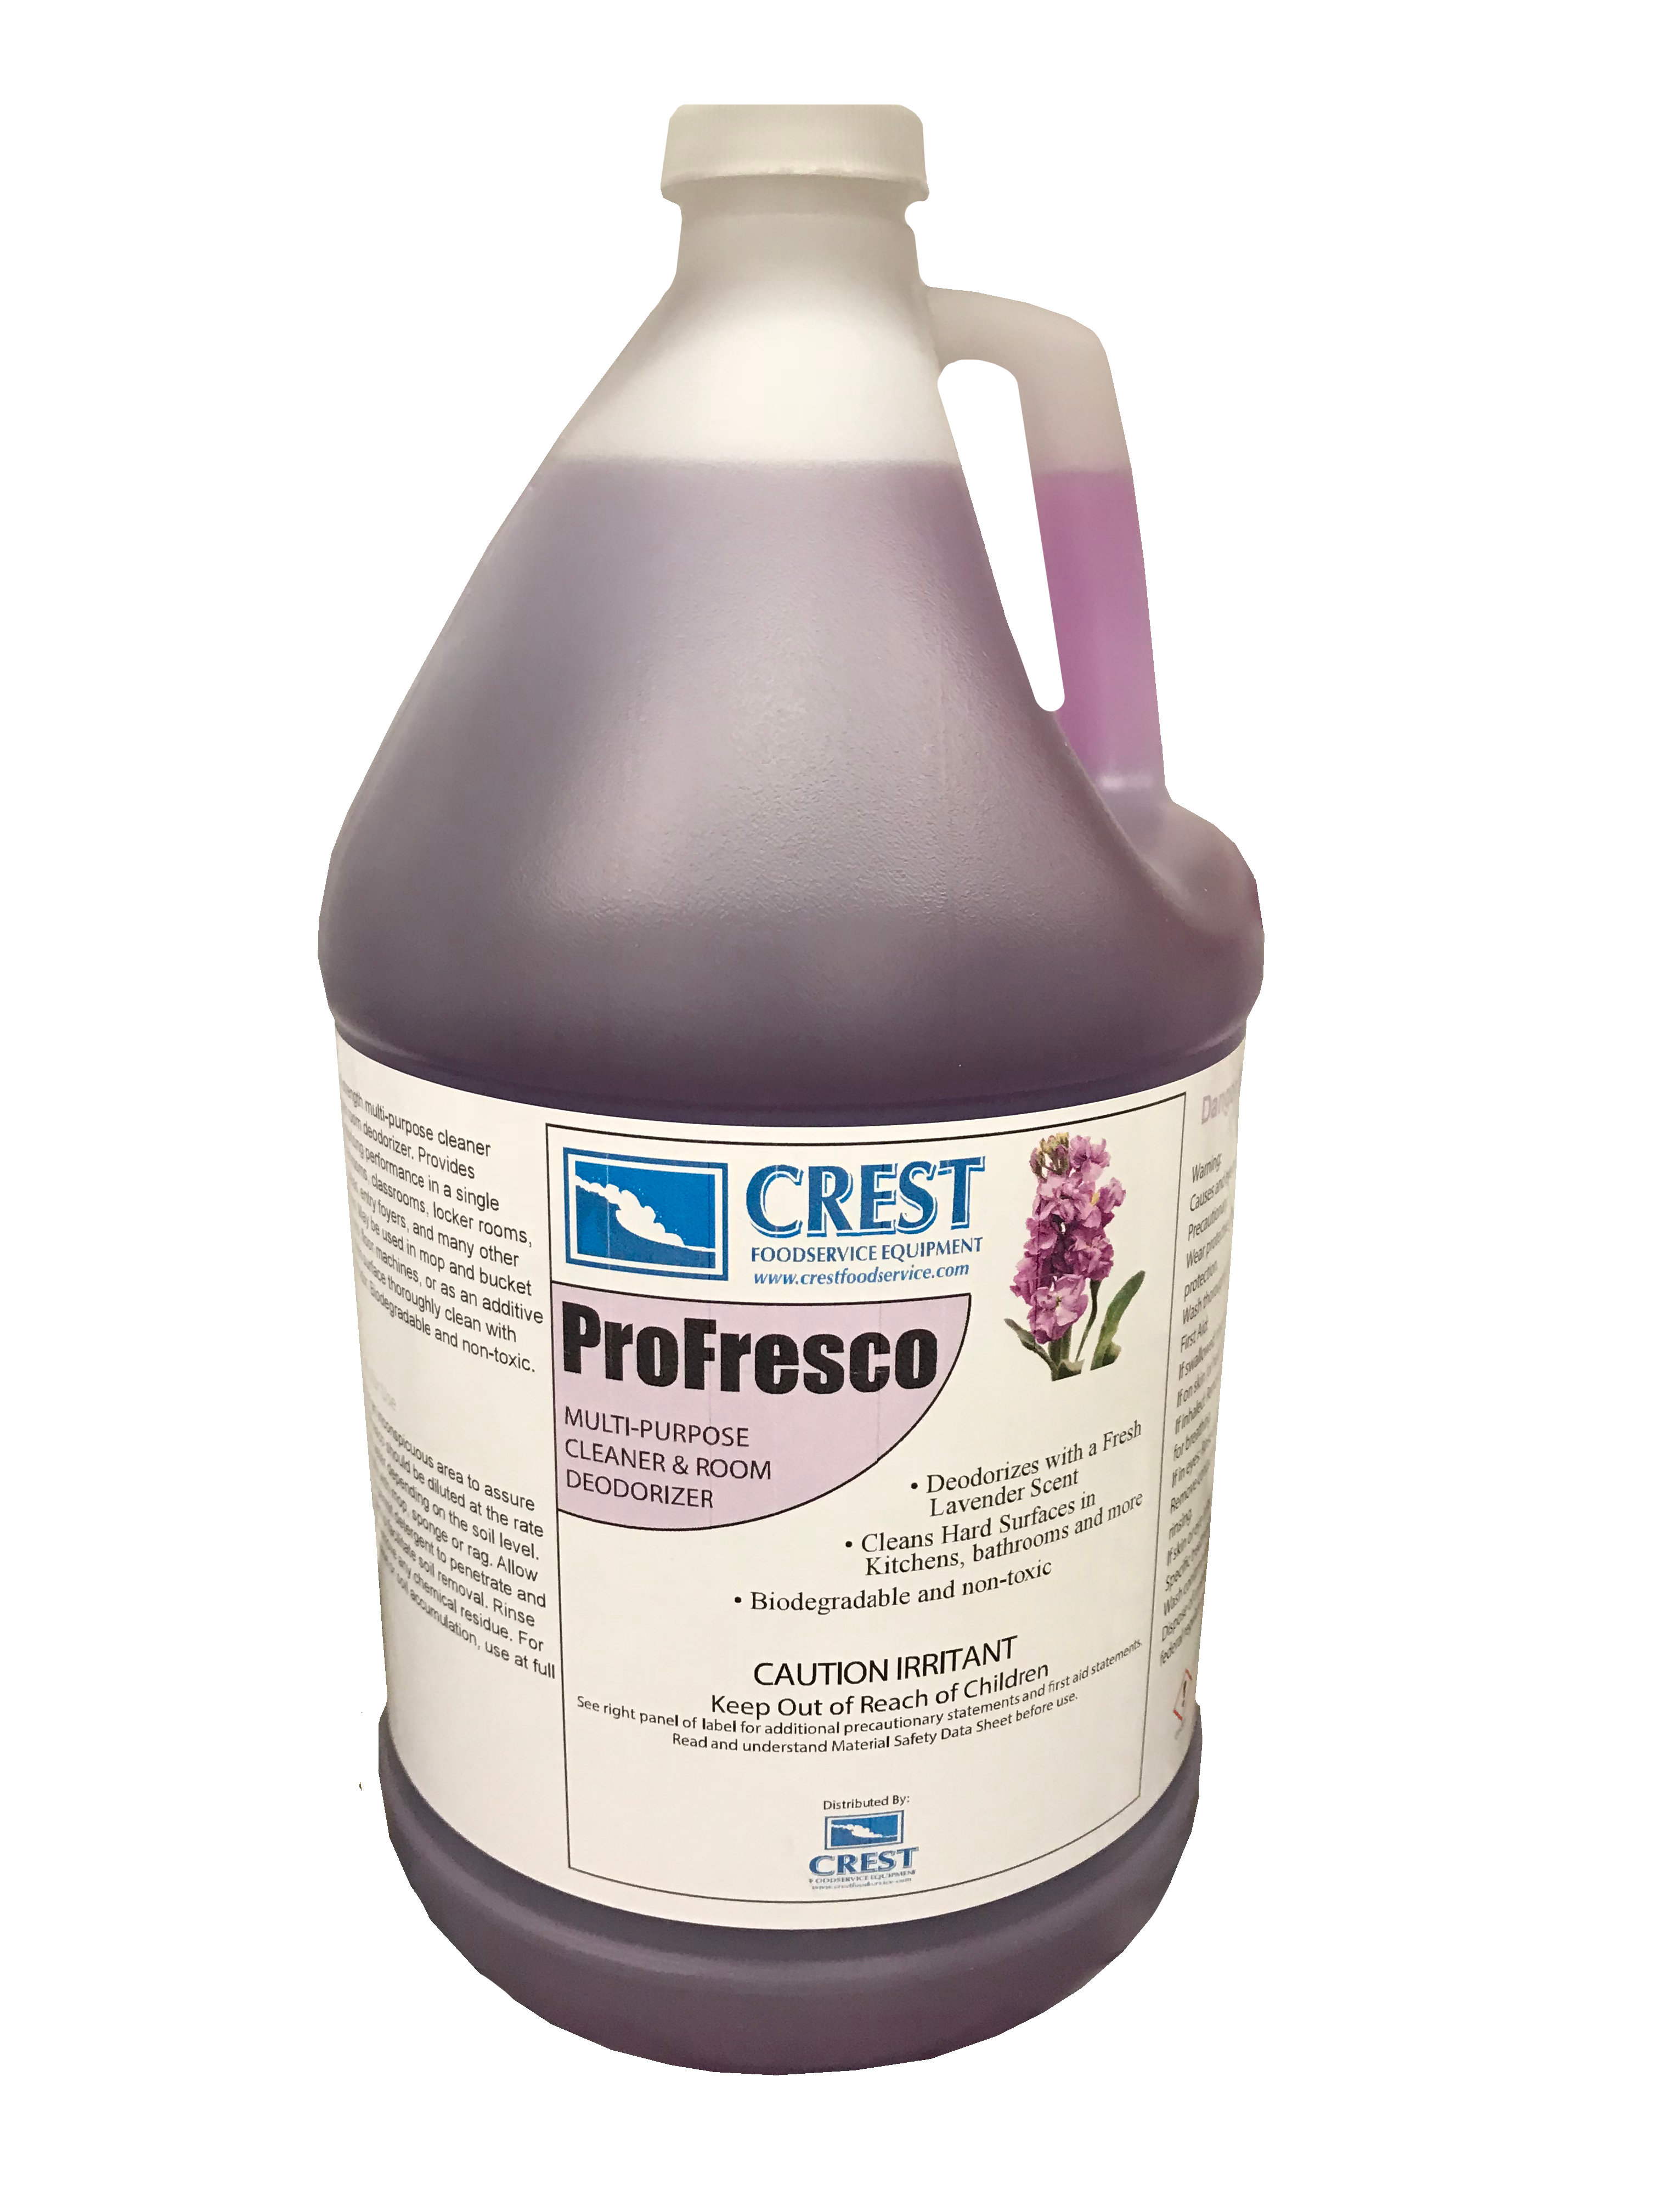 Detergents and Cleaners - CREST FOODSERVICE EQUIP CO.